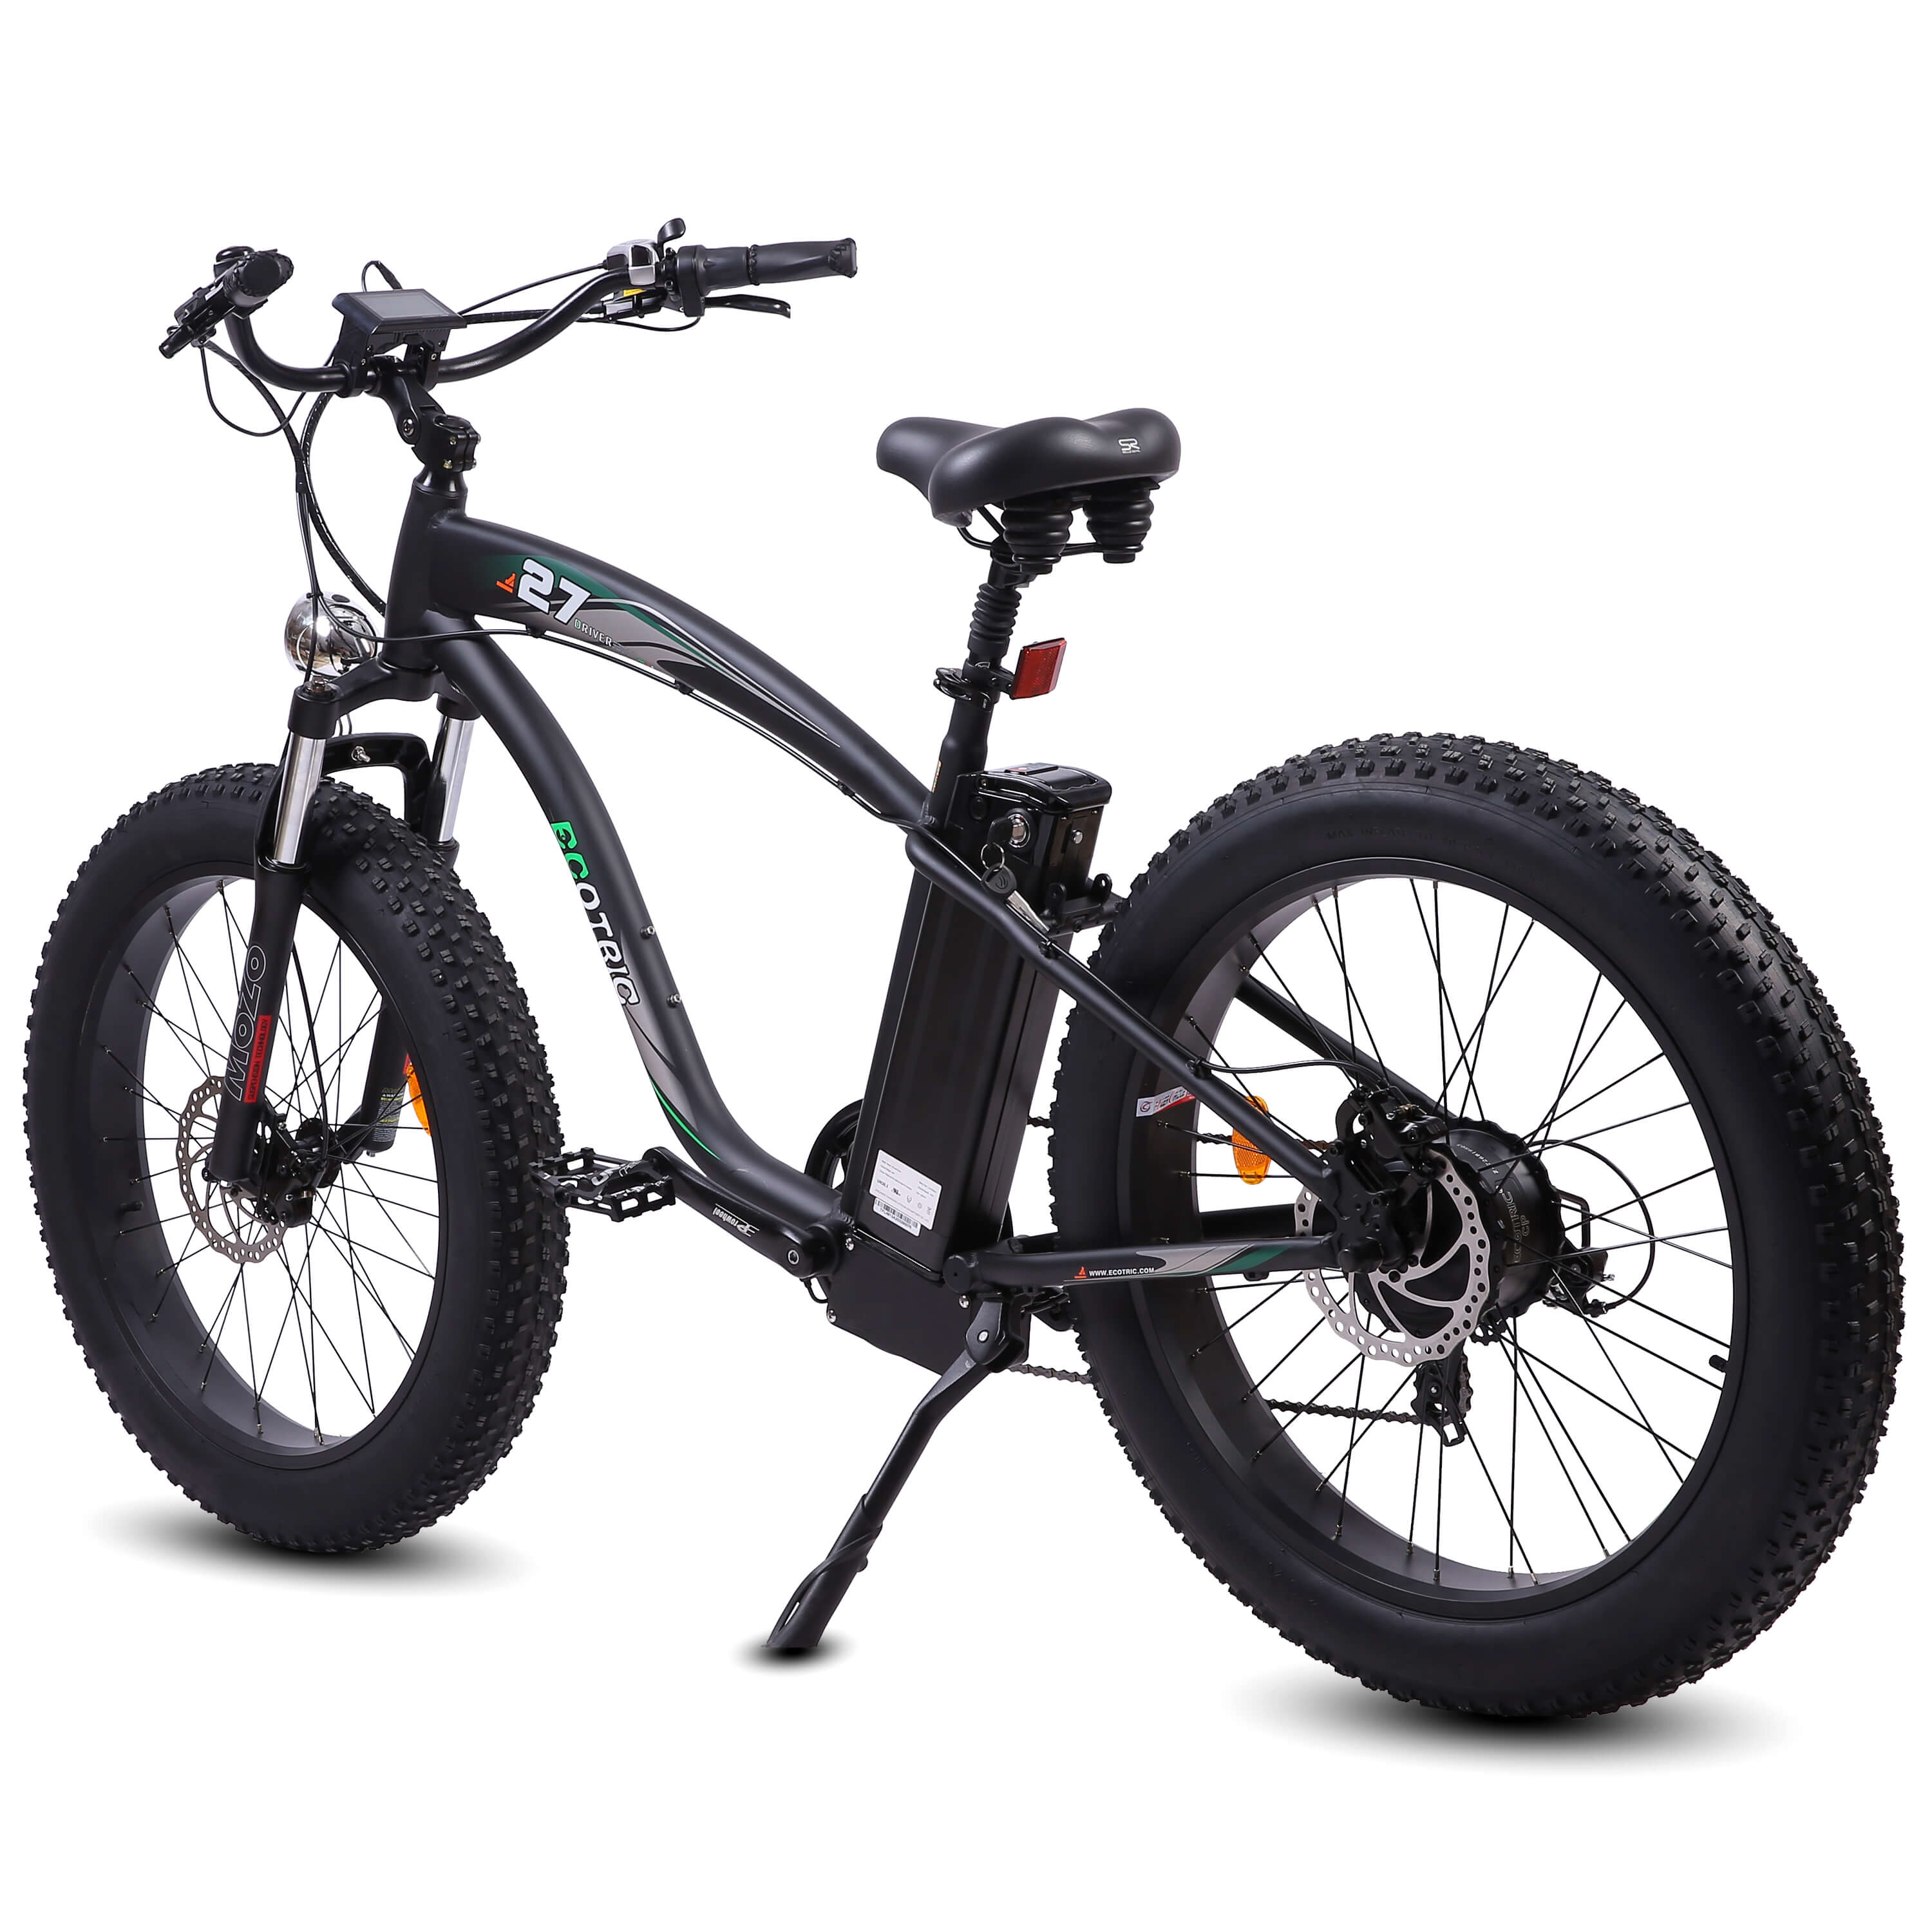 Ecotric Hammer Electric Fat Tire Beach Snow Bike